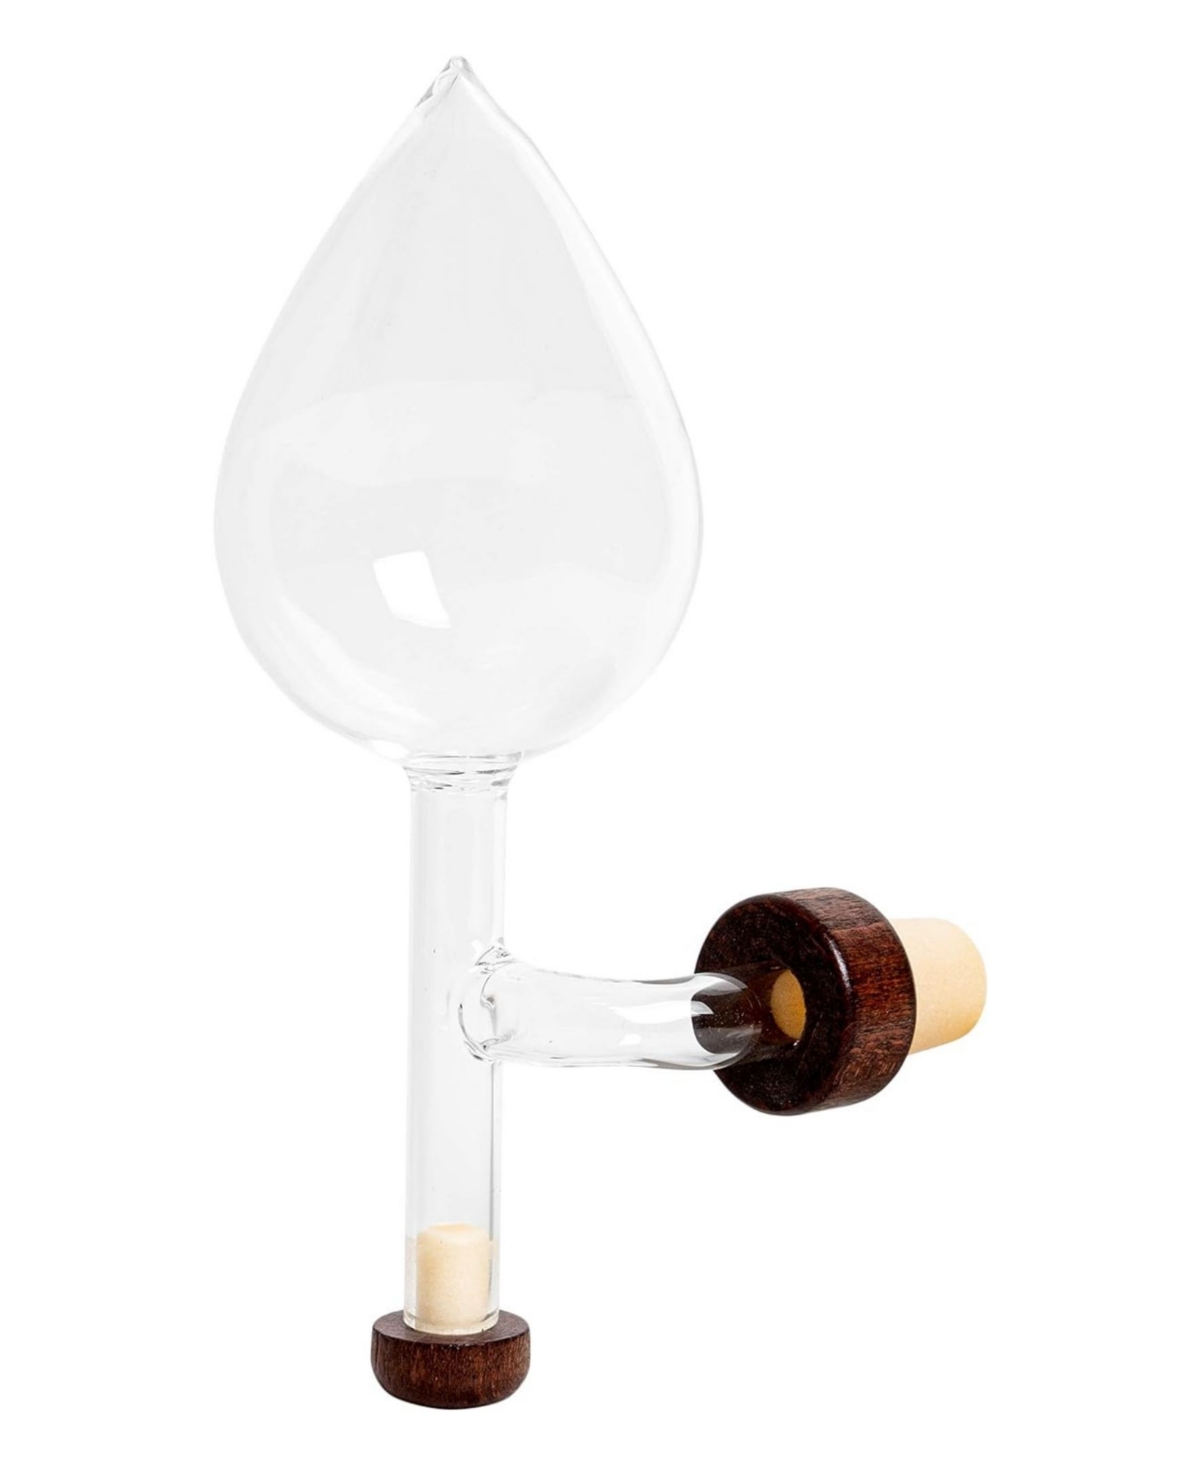 Shop The Wine Savant Italian Wine Aerator And Decanter, Oenophile Gift, With Gift Box In Clear